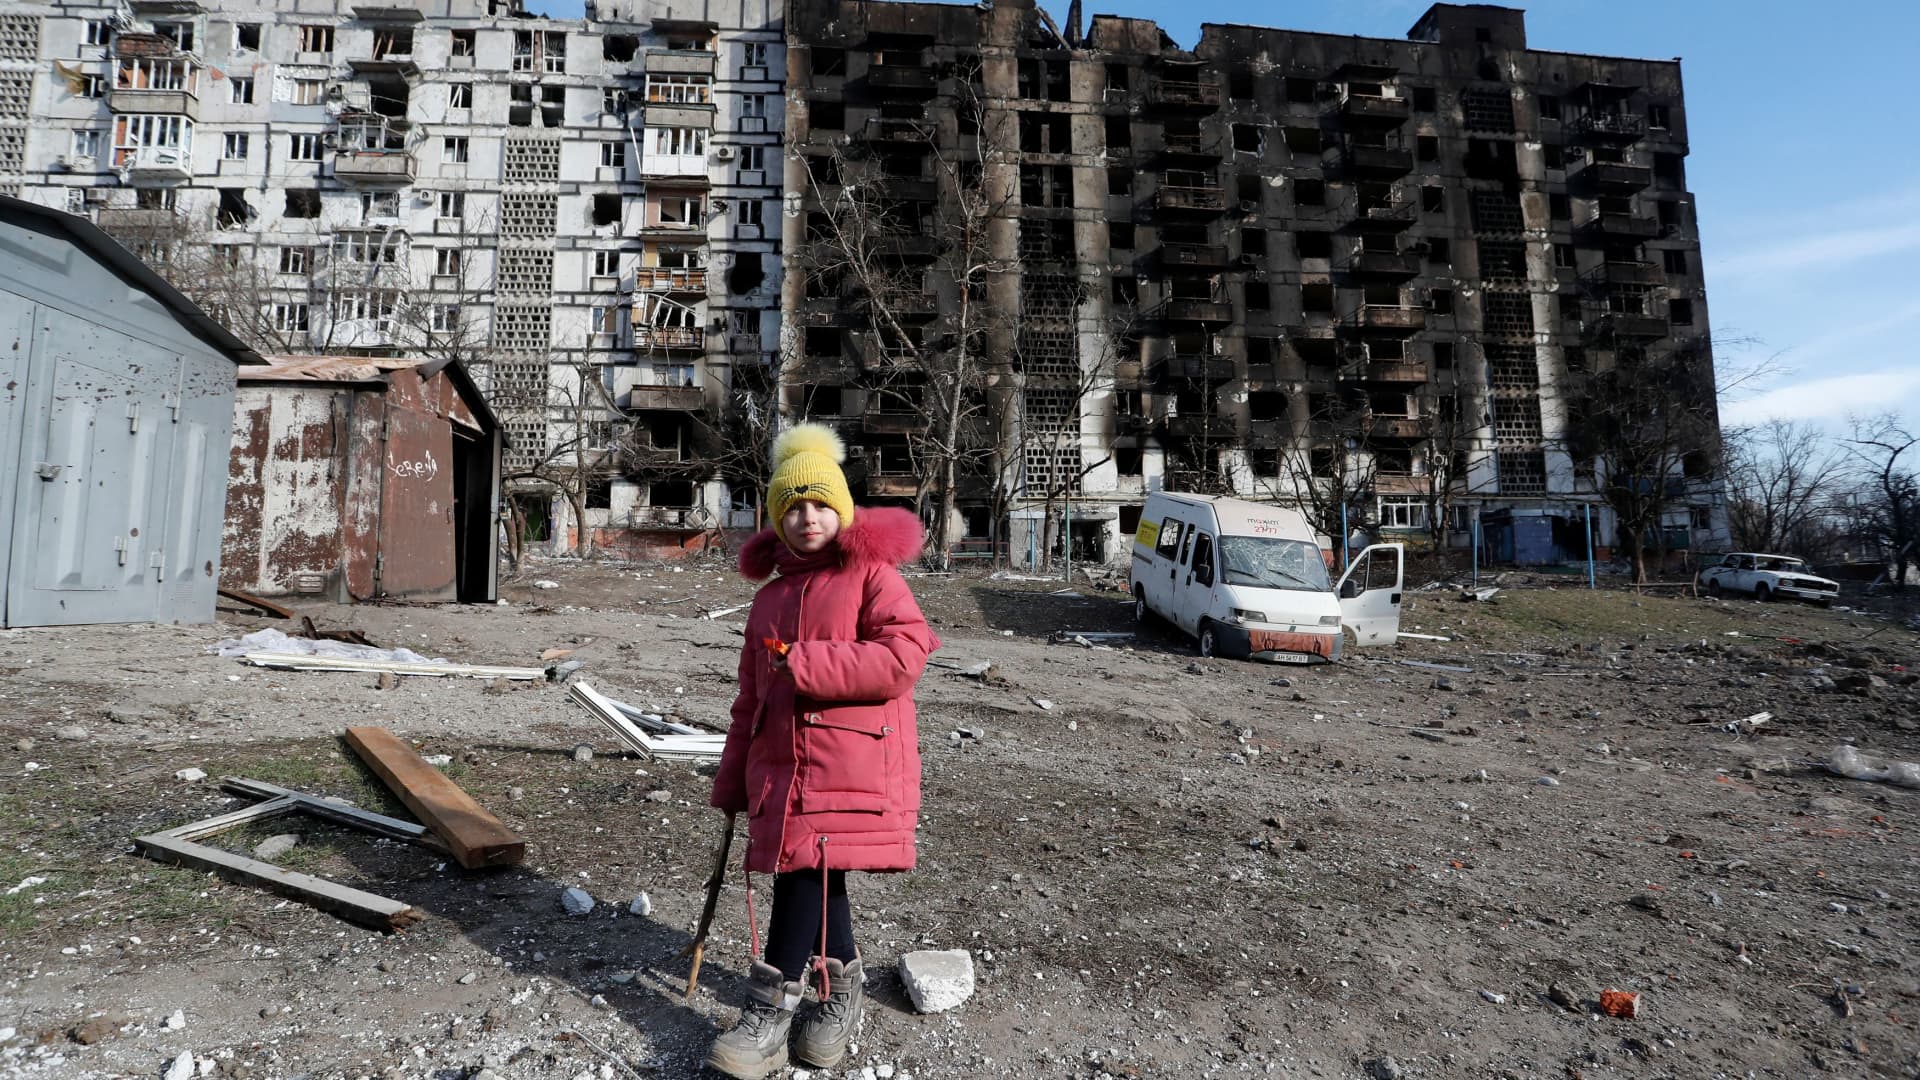 A girl walks in the courtyard of an apartment building destroyed in the course of Ukraine-Russia conflict in the besieged southern port city of Mariupol, Ukraine March 28, 2022.